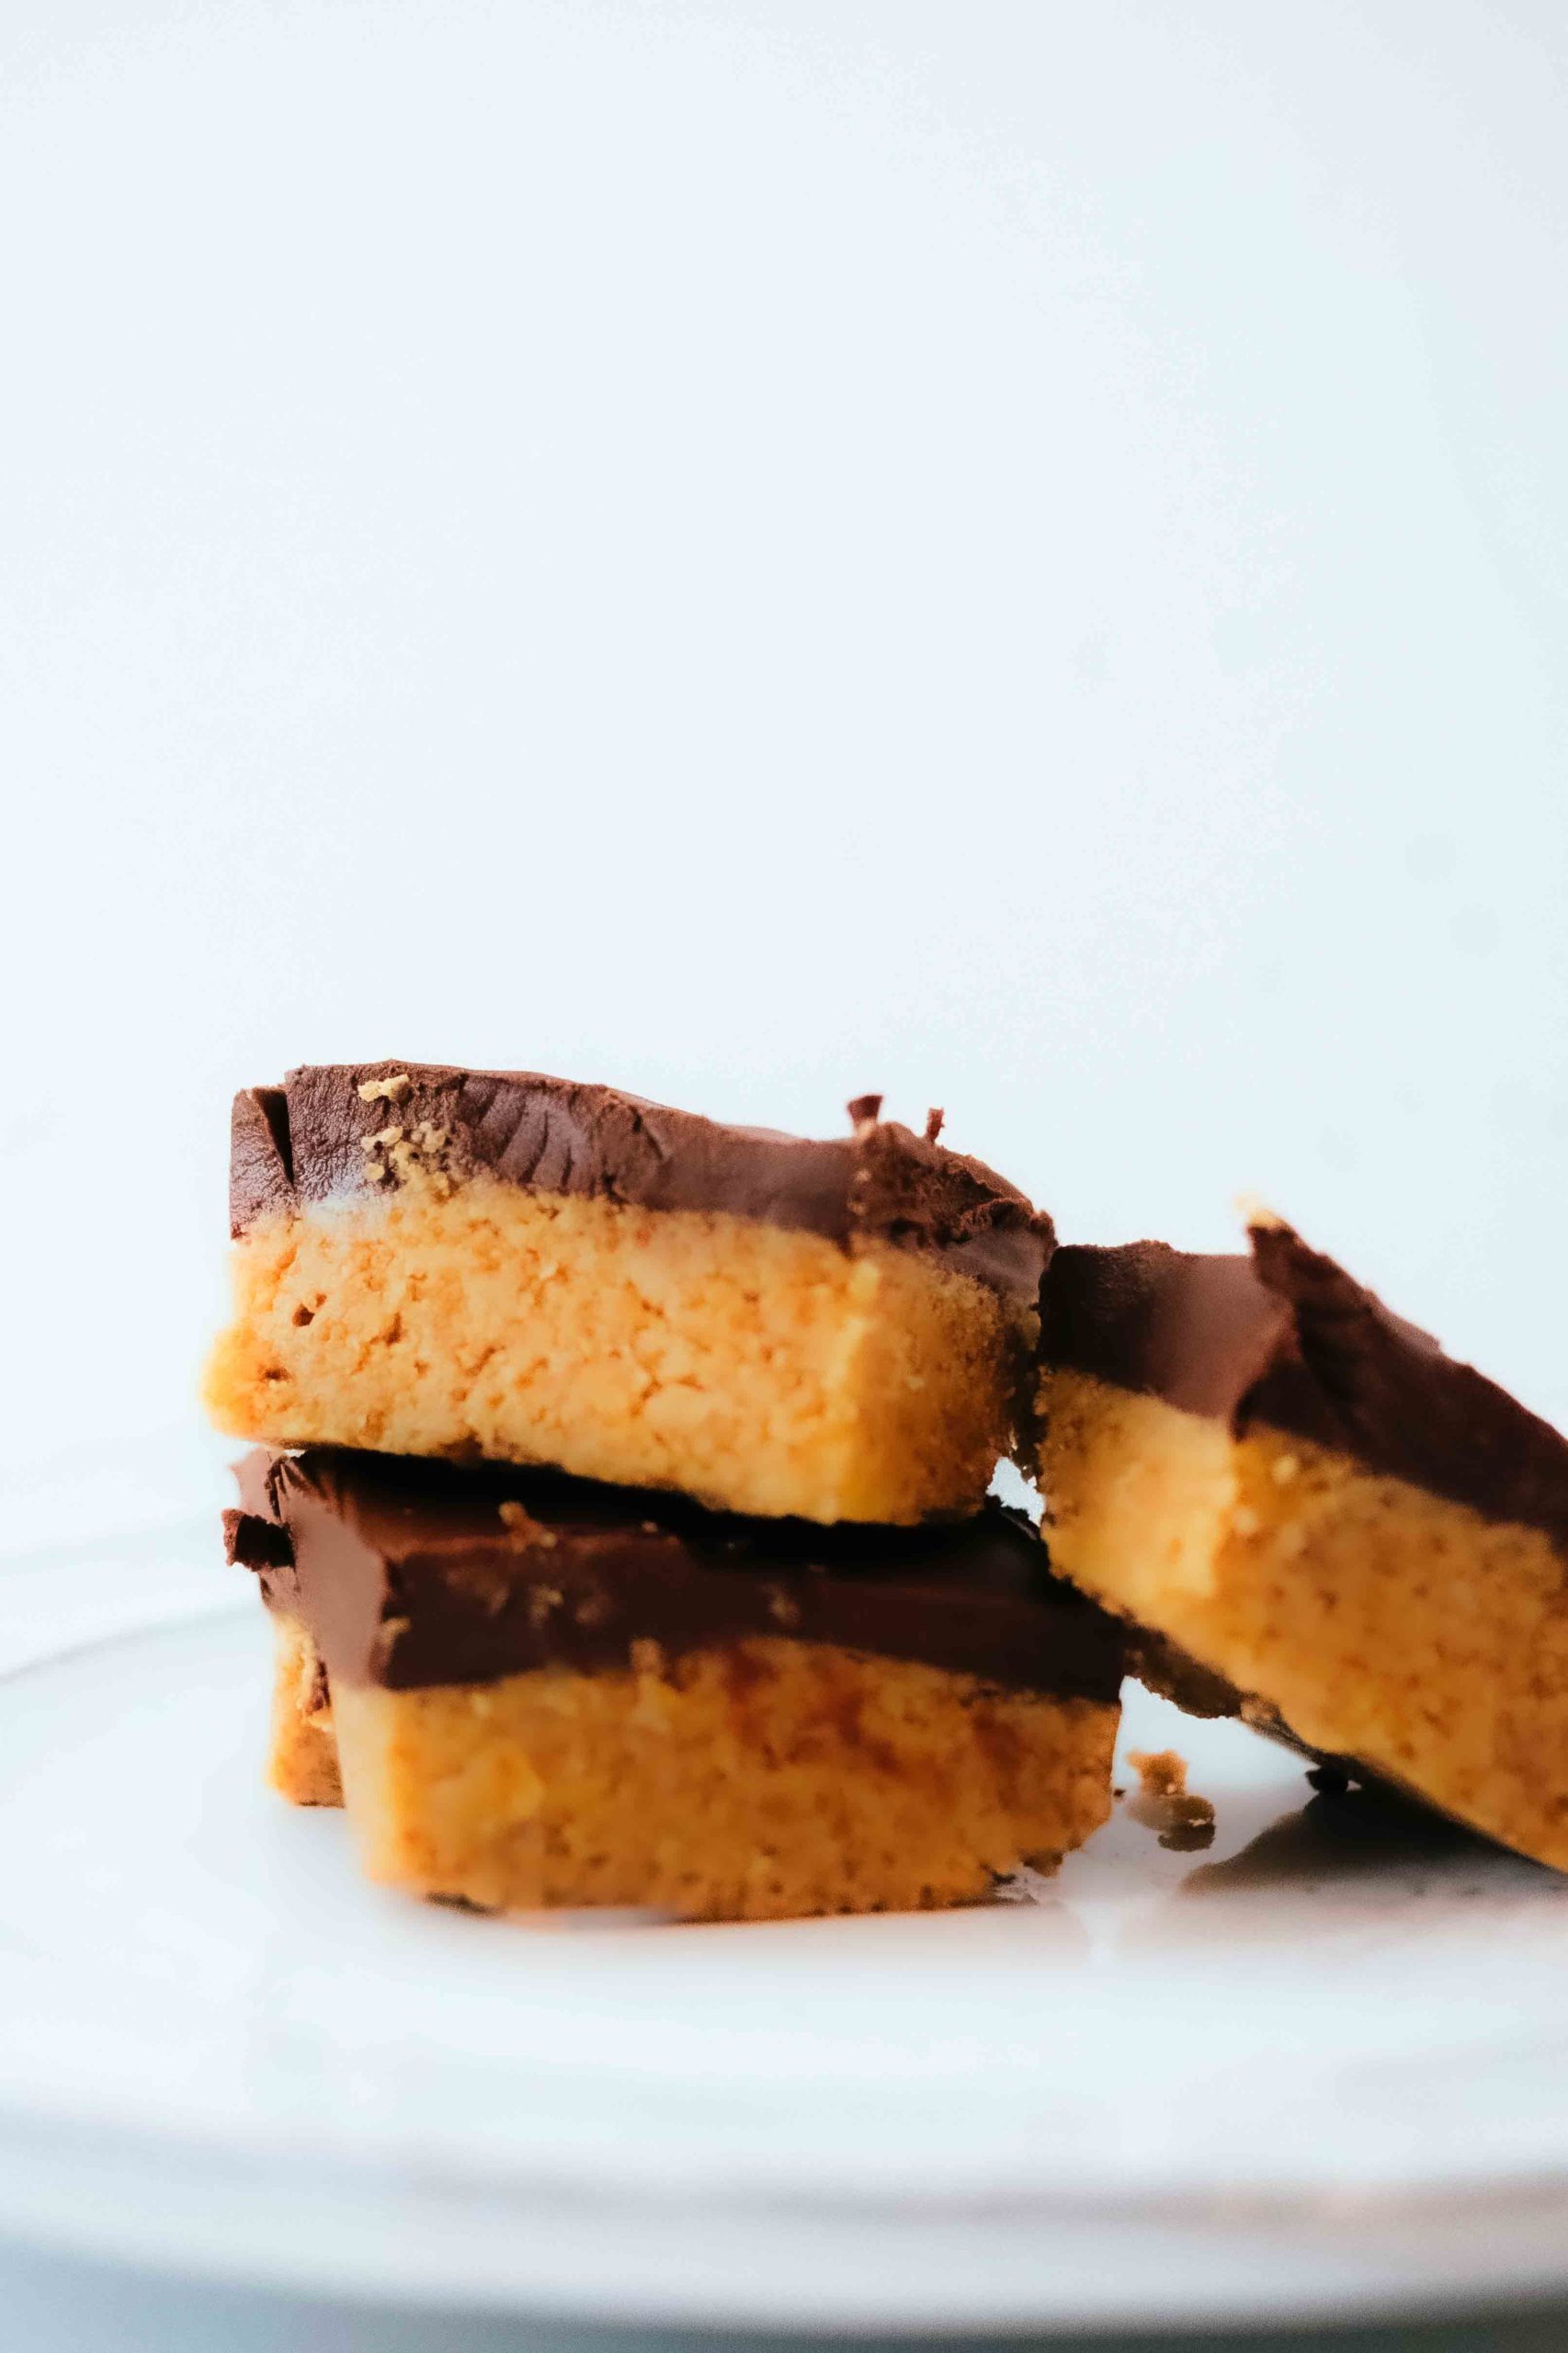 https://thereislifeafterwheat.com/wp-content/uploads/2023/03/2-Ingredient-Fudge-with-Ganache-1-scaled.jpg